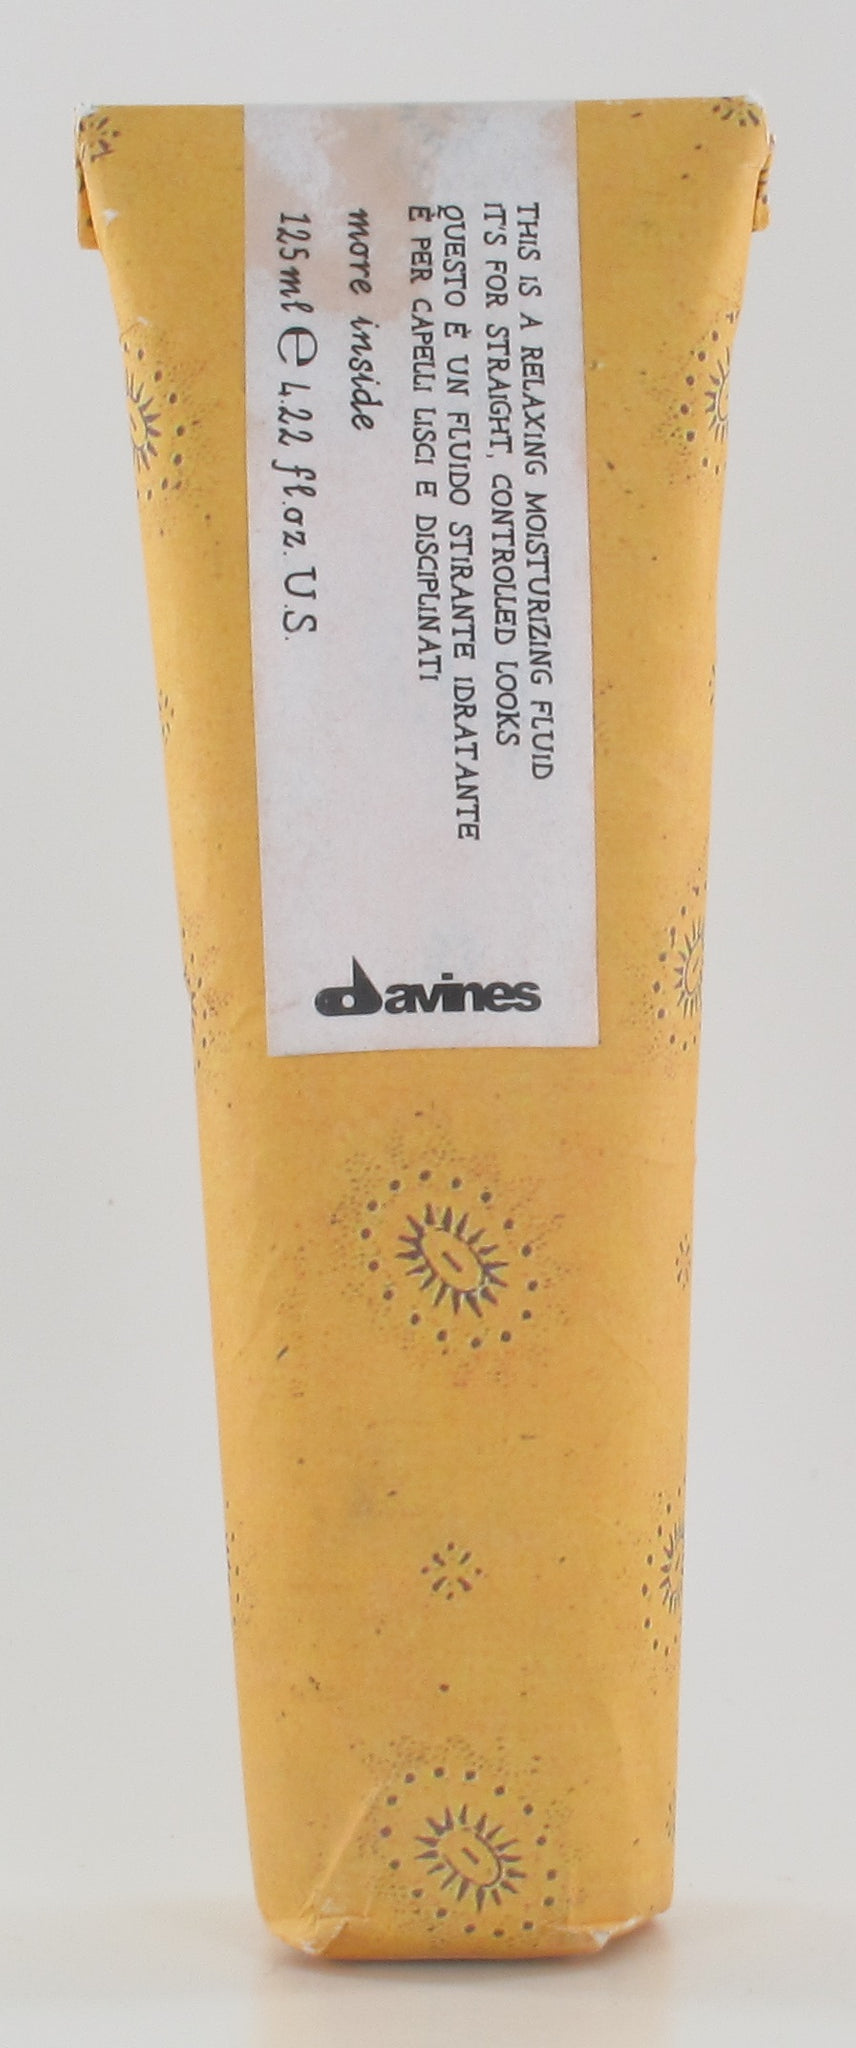 DAVINES This is A Relaxing Moisturizing Fluid 4.23 oz